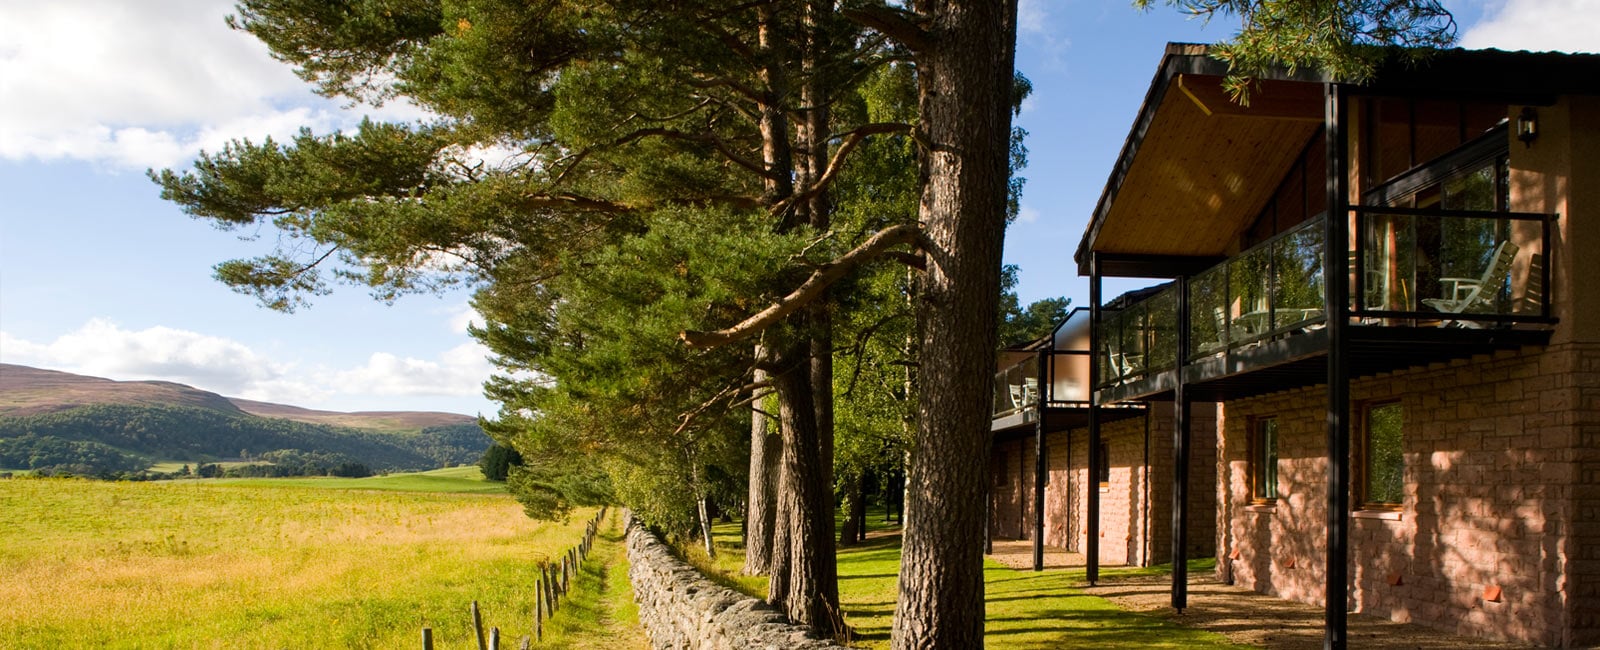 Exterior of Craigendarroch Lodges, Managed by Hilton Grand Vacations in Royal Deeside, Scotland